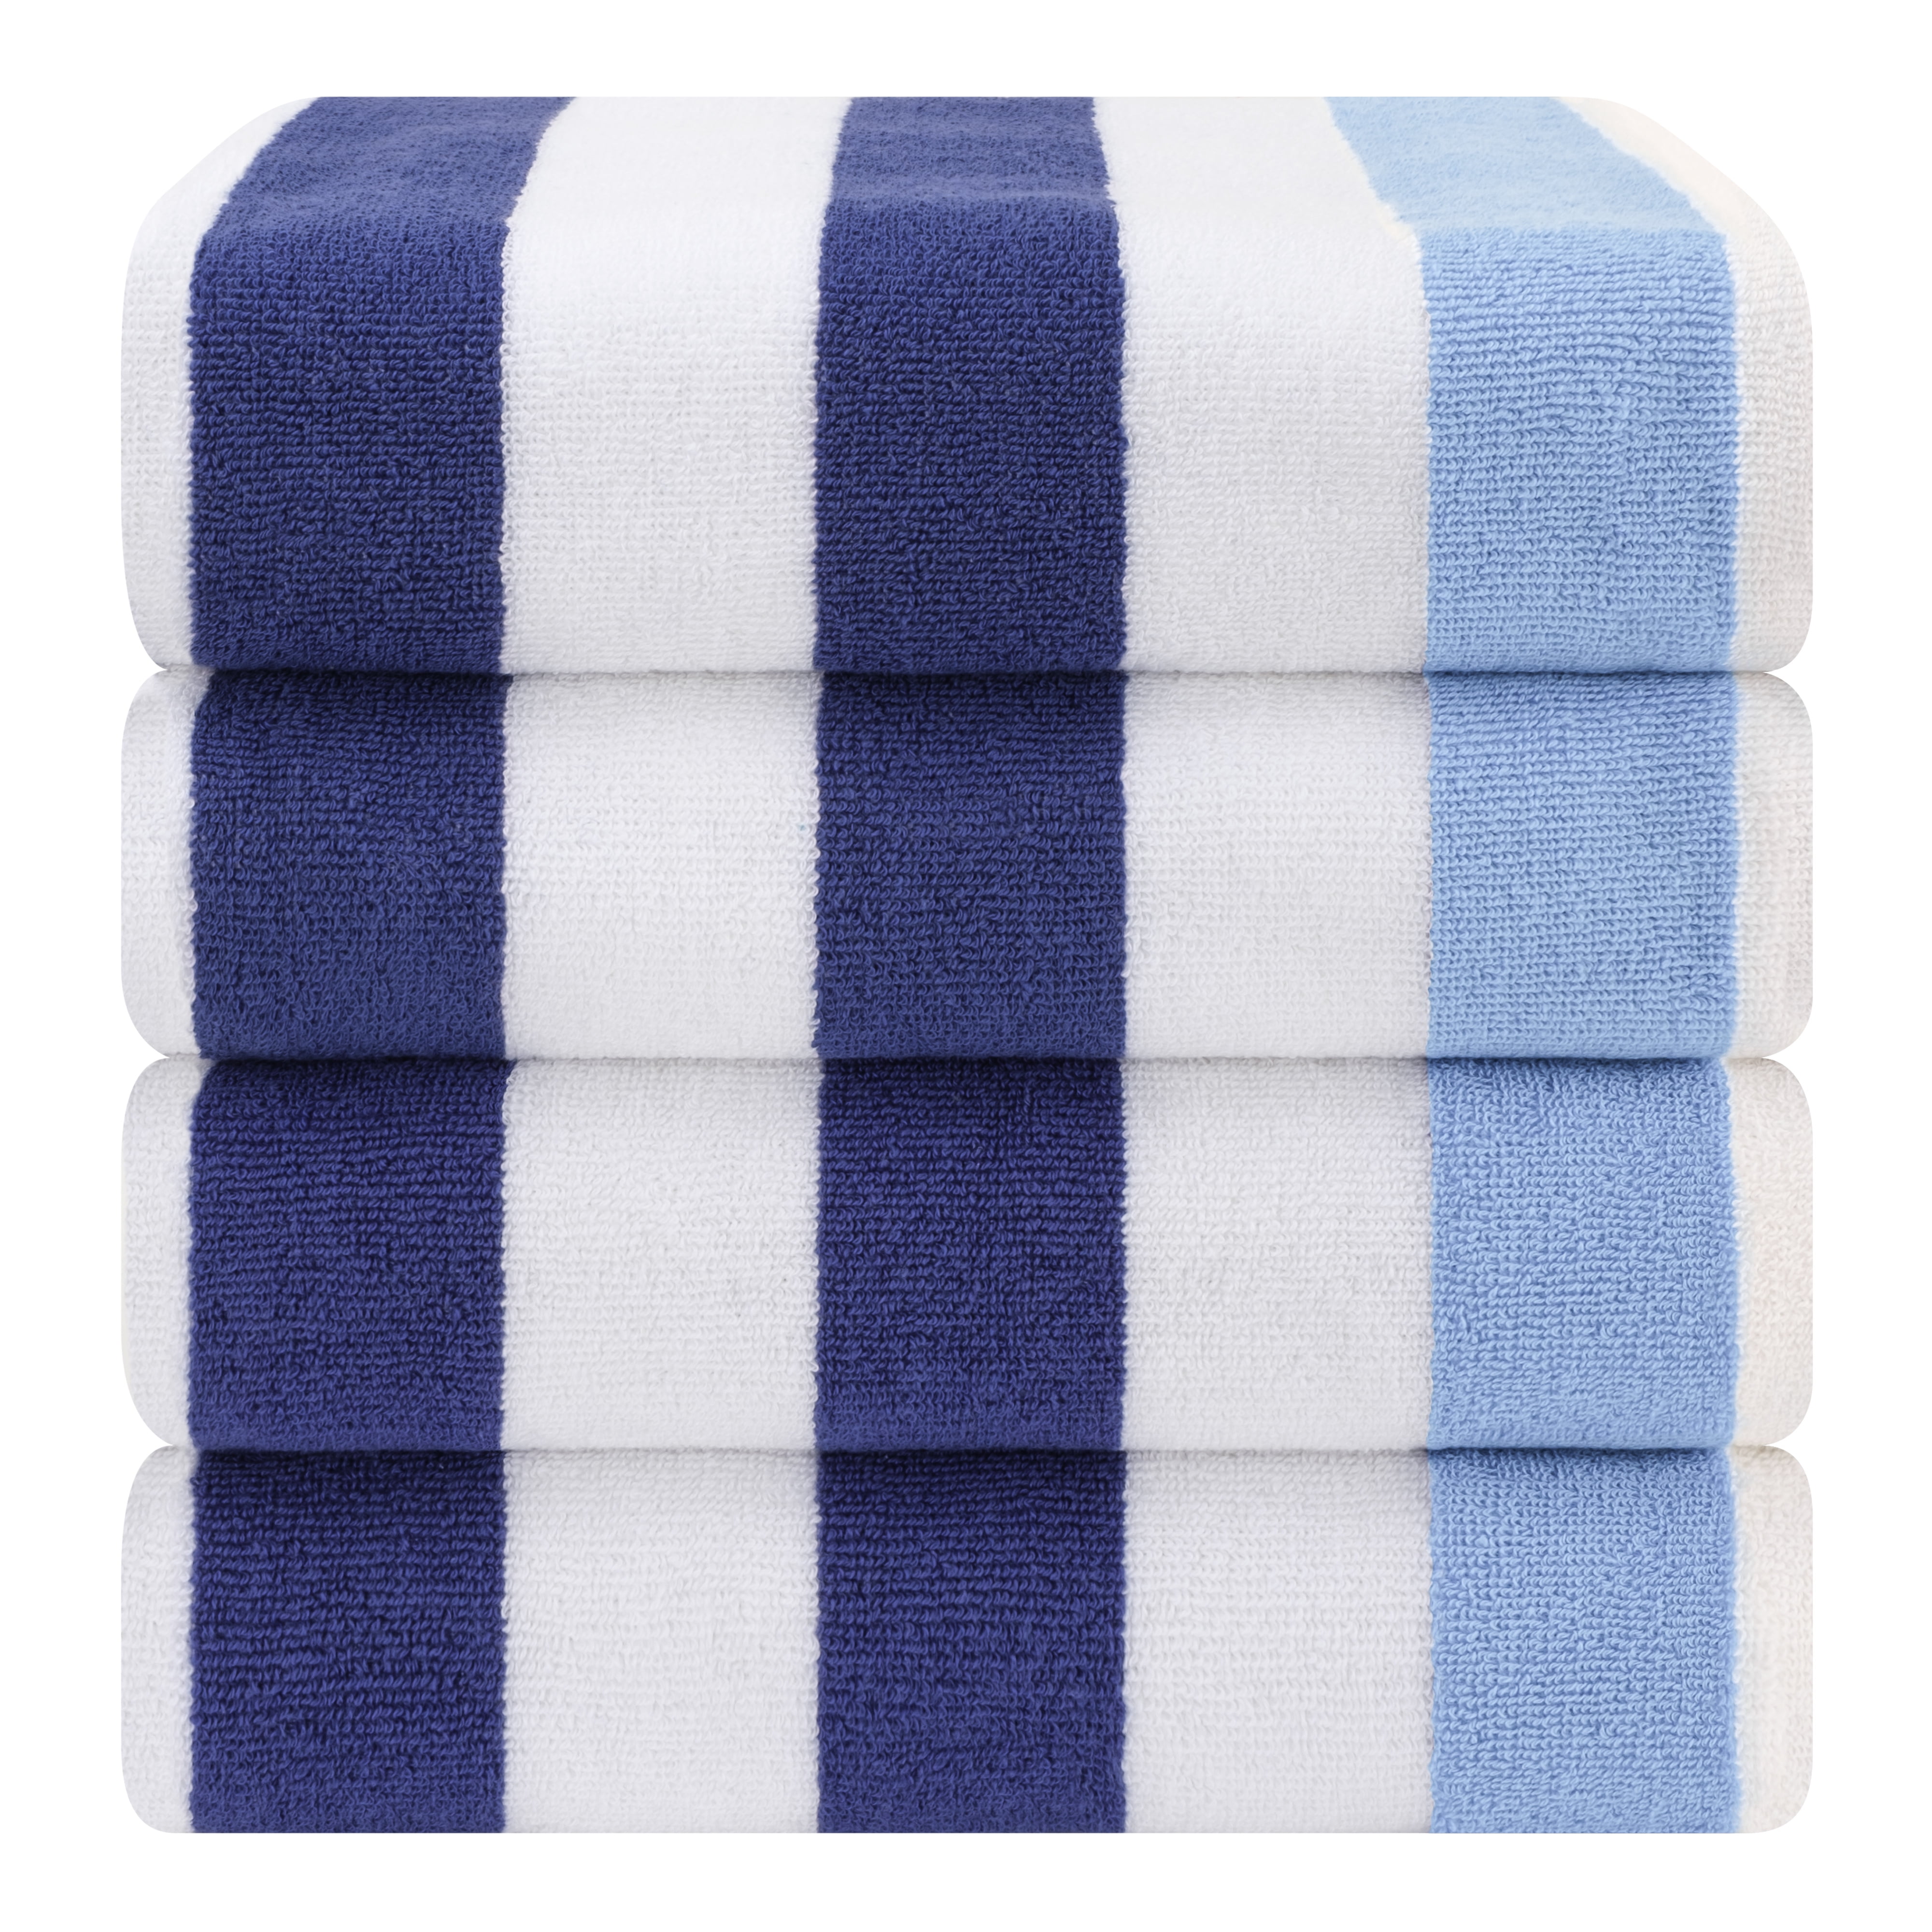 4-Pack: 30 x 60 Ultra-Soft 100% Cotton Striped Pool Cabana Hotel Beach  Towels, 30x60, 4-pack - Pay Less Super Markets